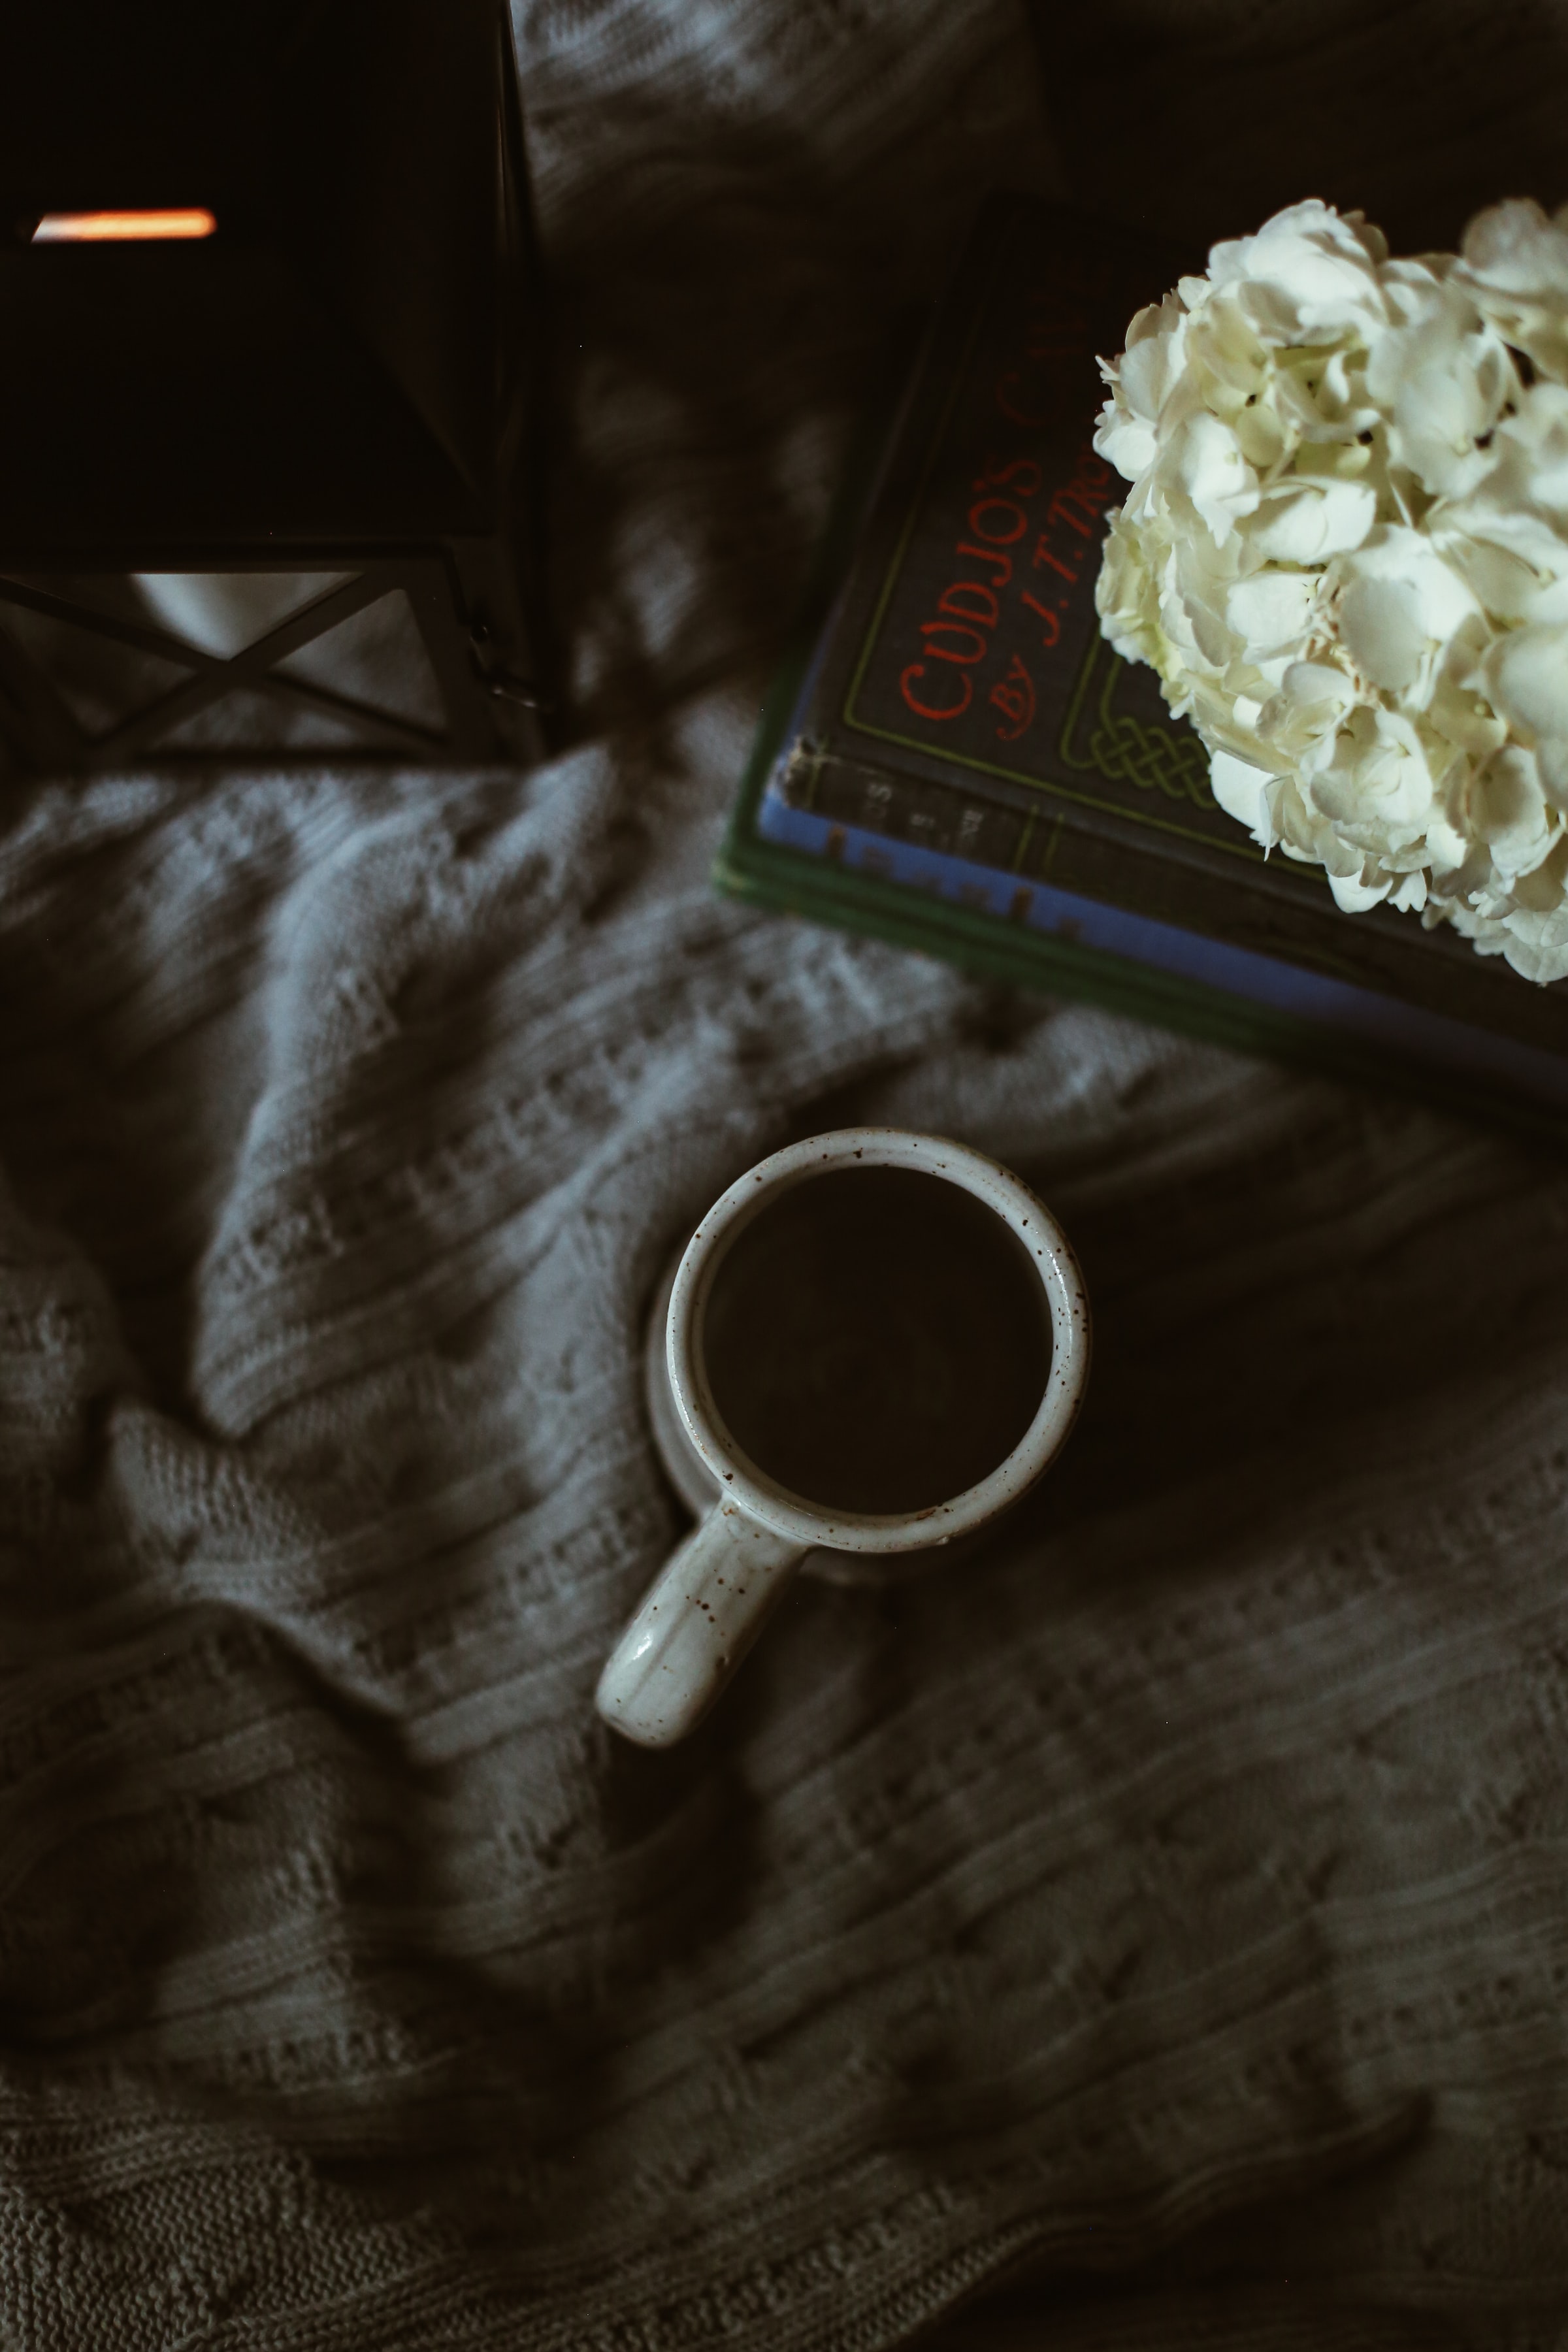 PC Wallpapers flowers, coffee, miscellanea, miscellaneous, cup, cloth, book